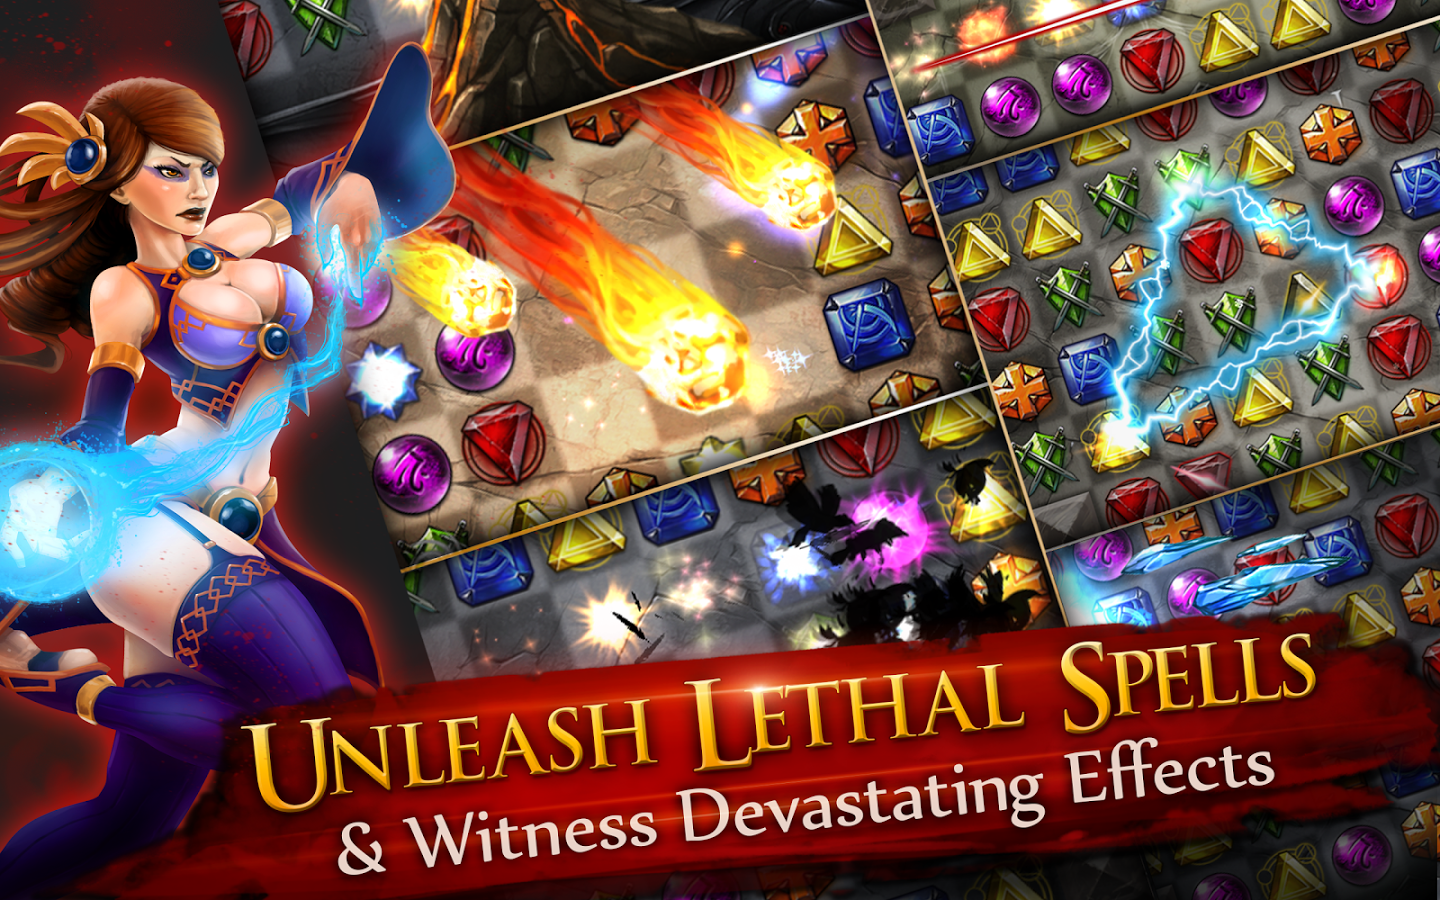 Jewel Fight Heroes of Legend MOD APK+DATA (Unlimited Gems/Coins)